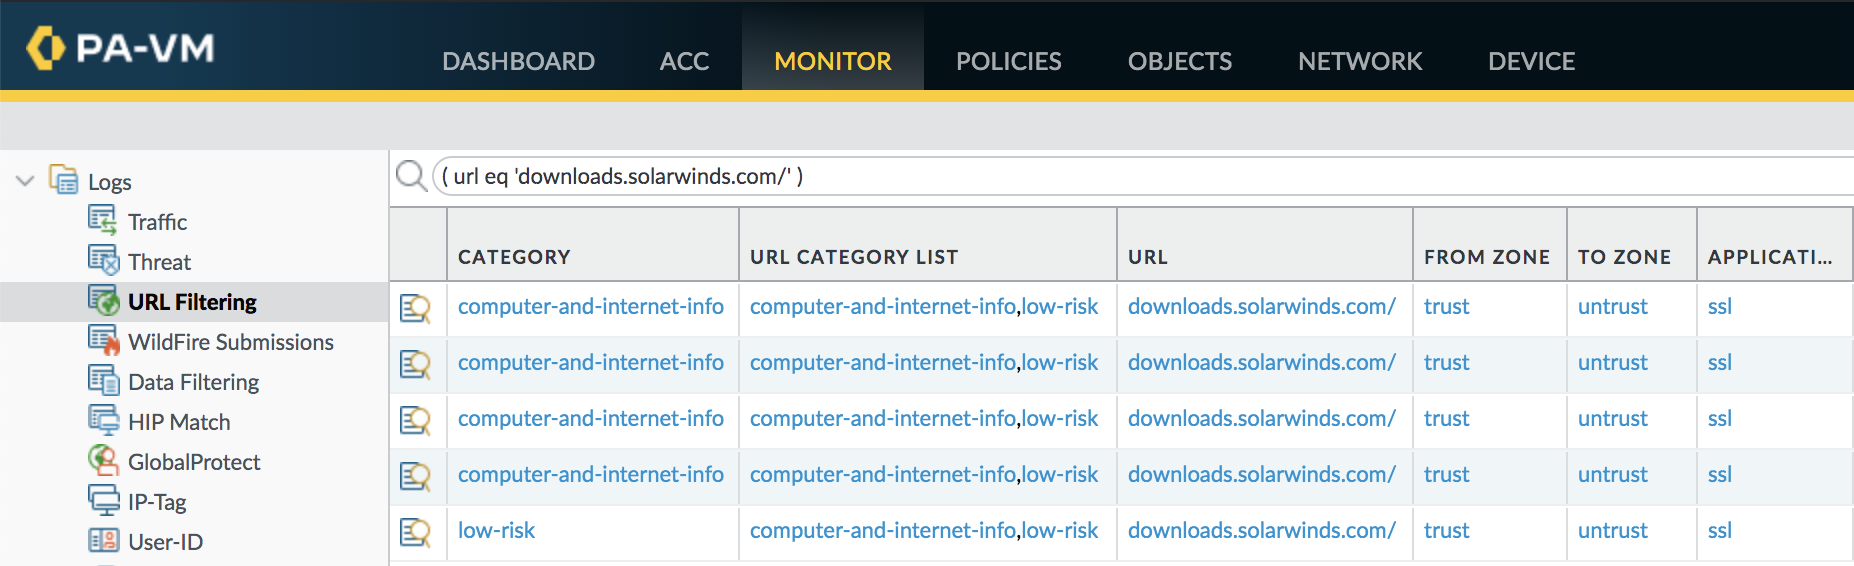 Example of how URL Filtering can help identify systems connecting to the SolarWinds download server and specifically downloading the SUNBURST plug-in update. 